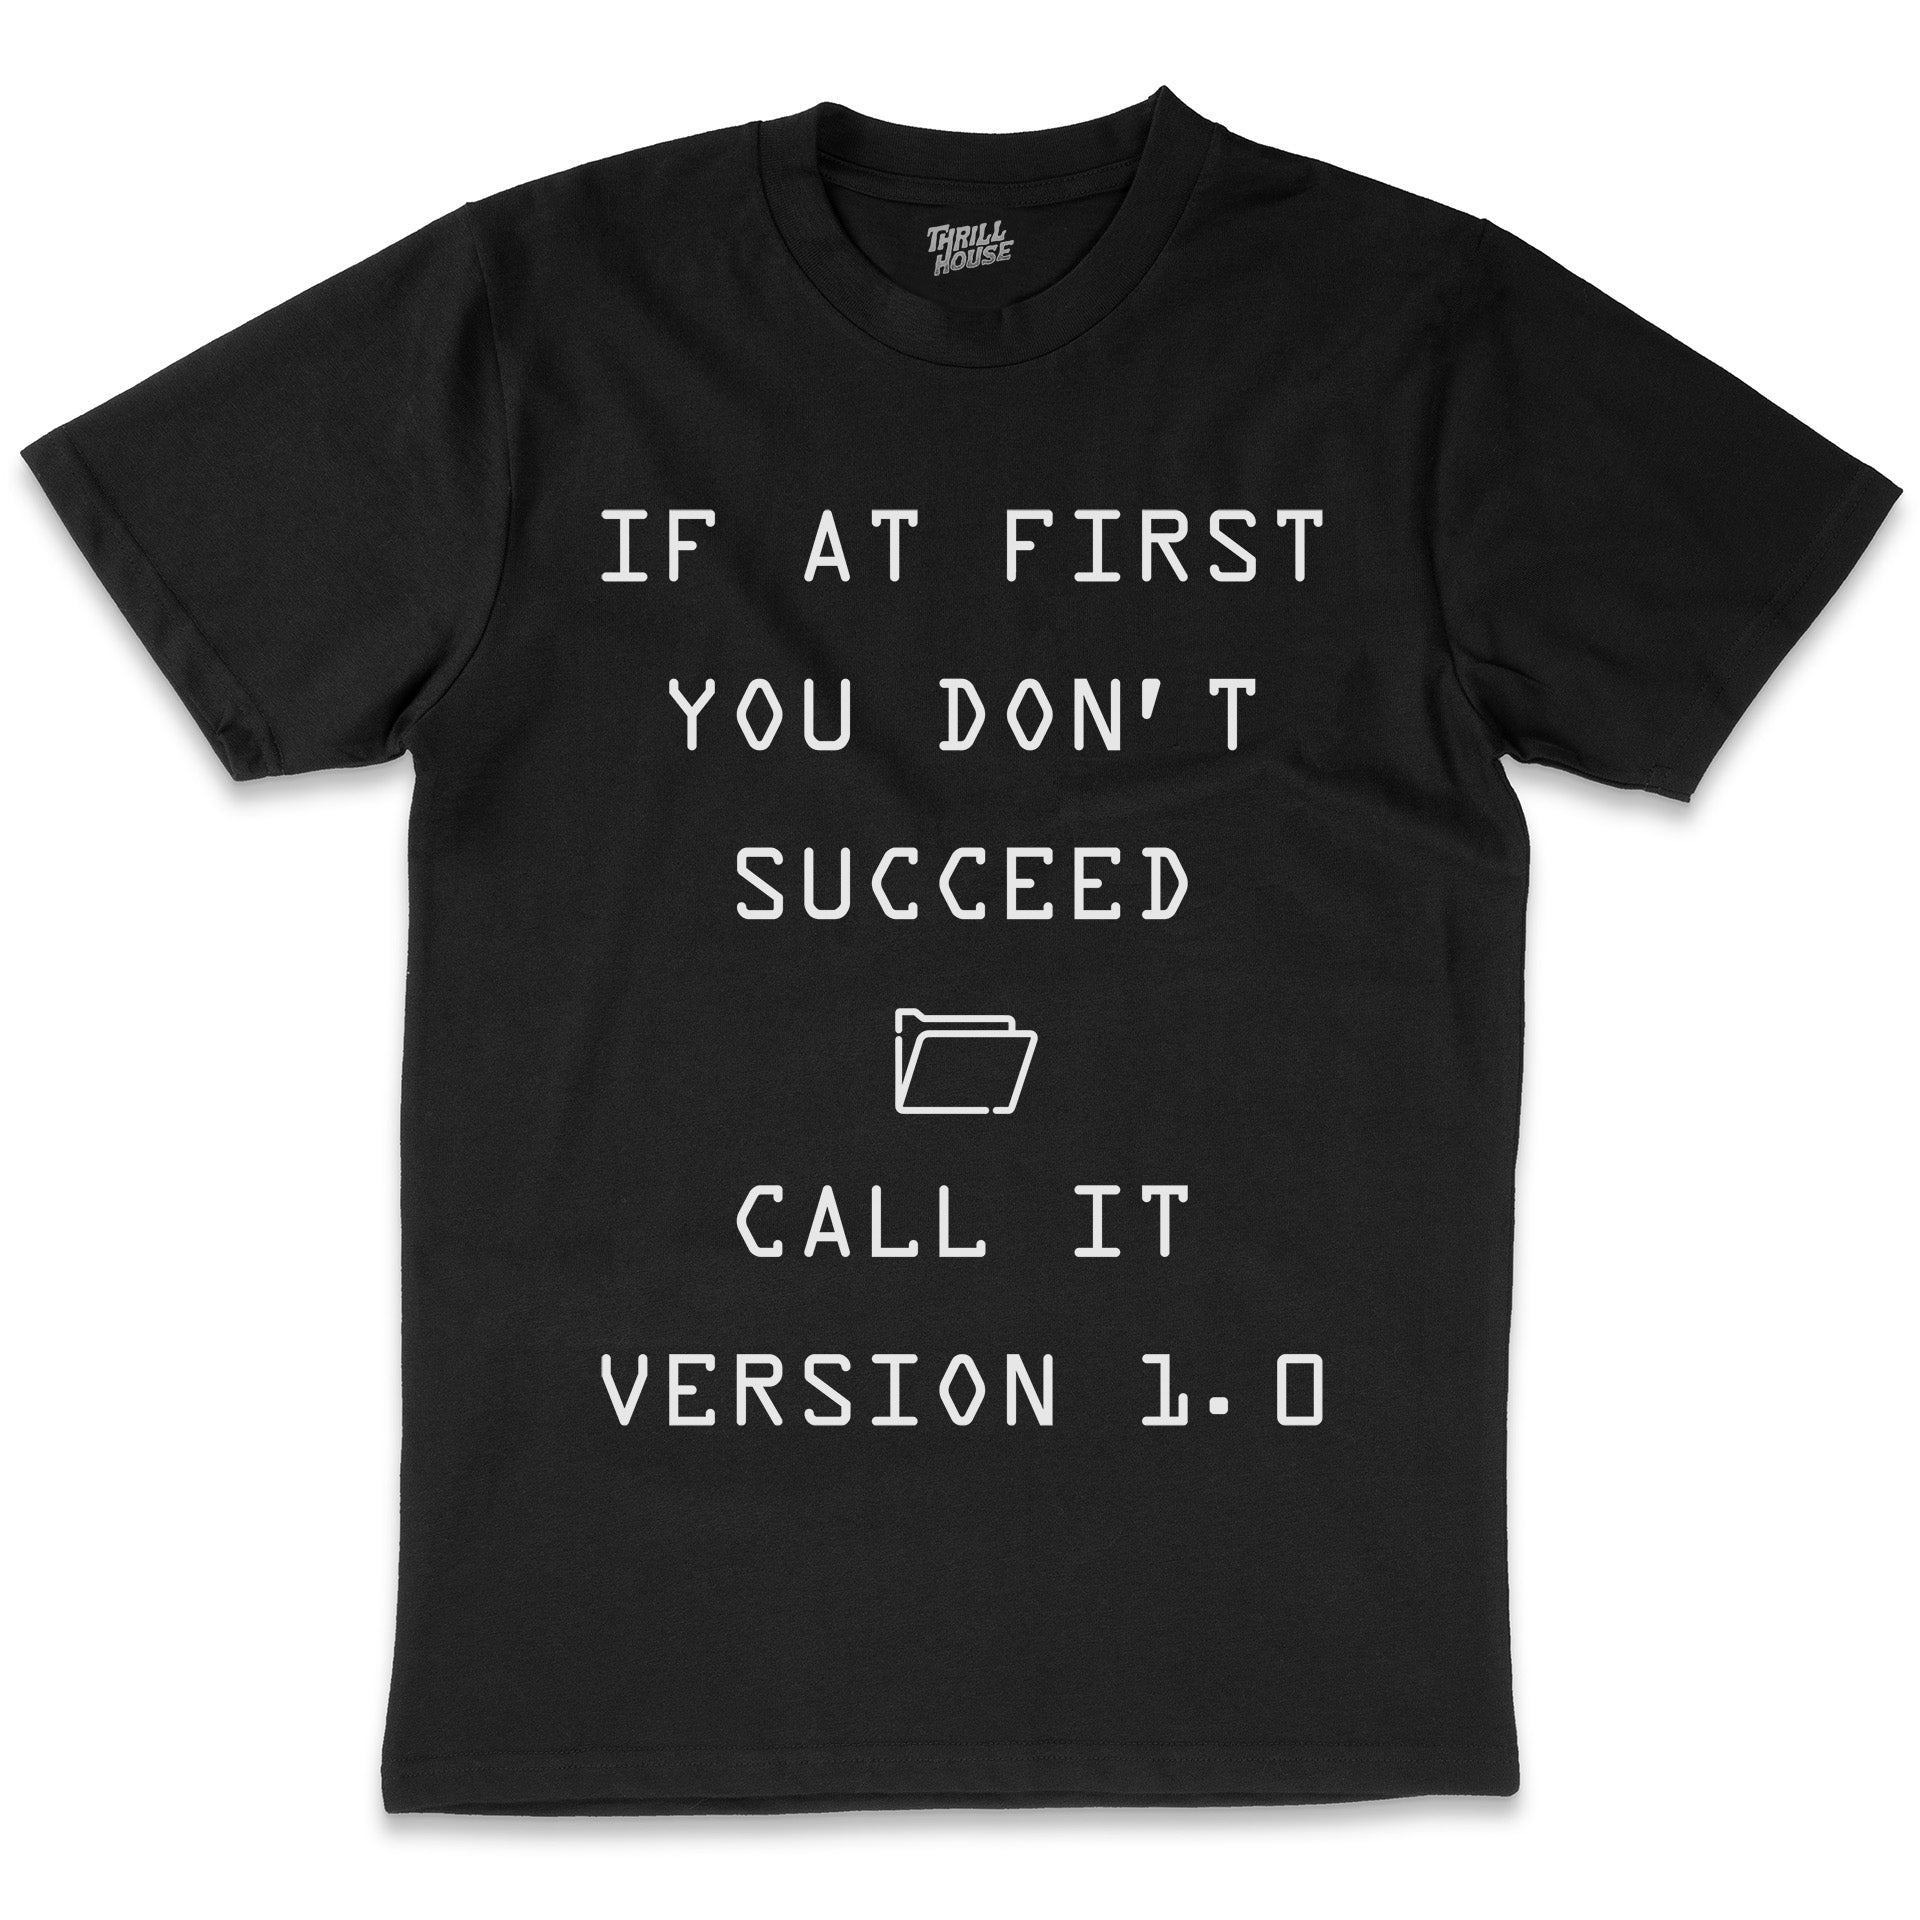 If At First You Don't Succeed Funny Computer Programmer Geek Nerd Cotton T-Shirt